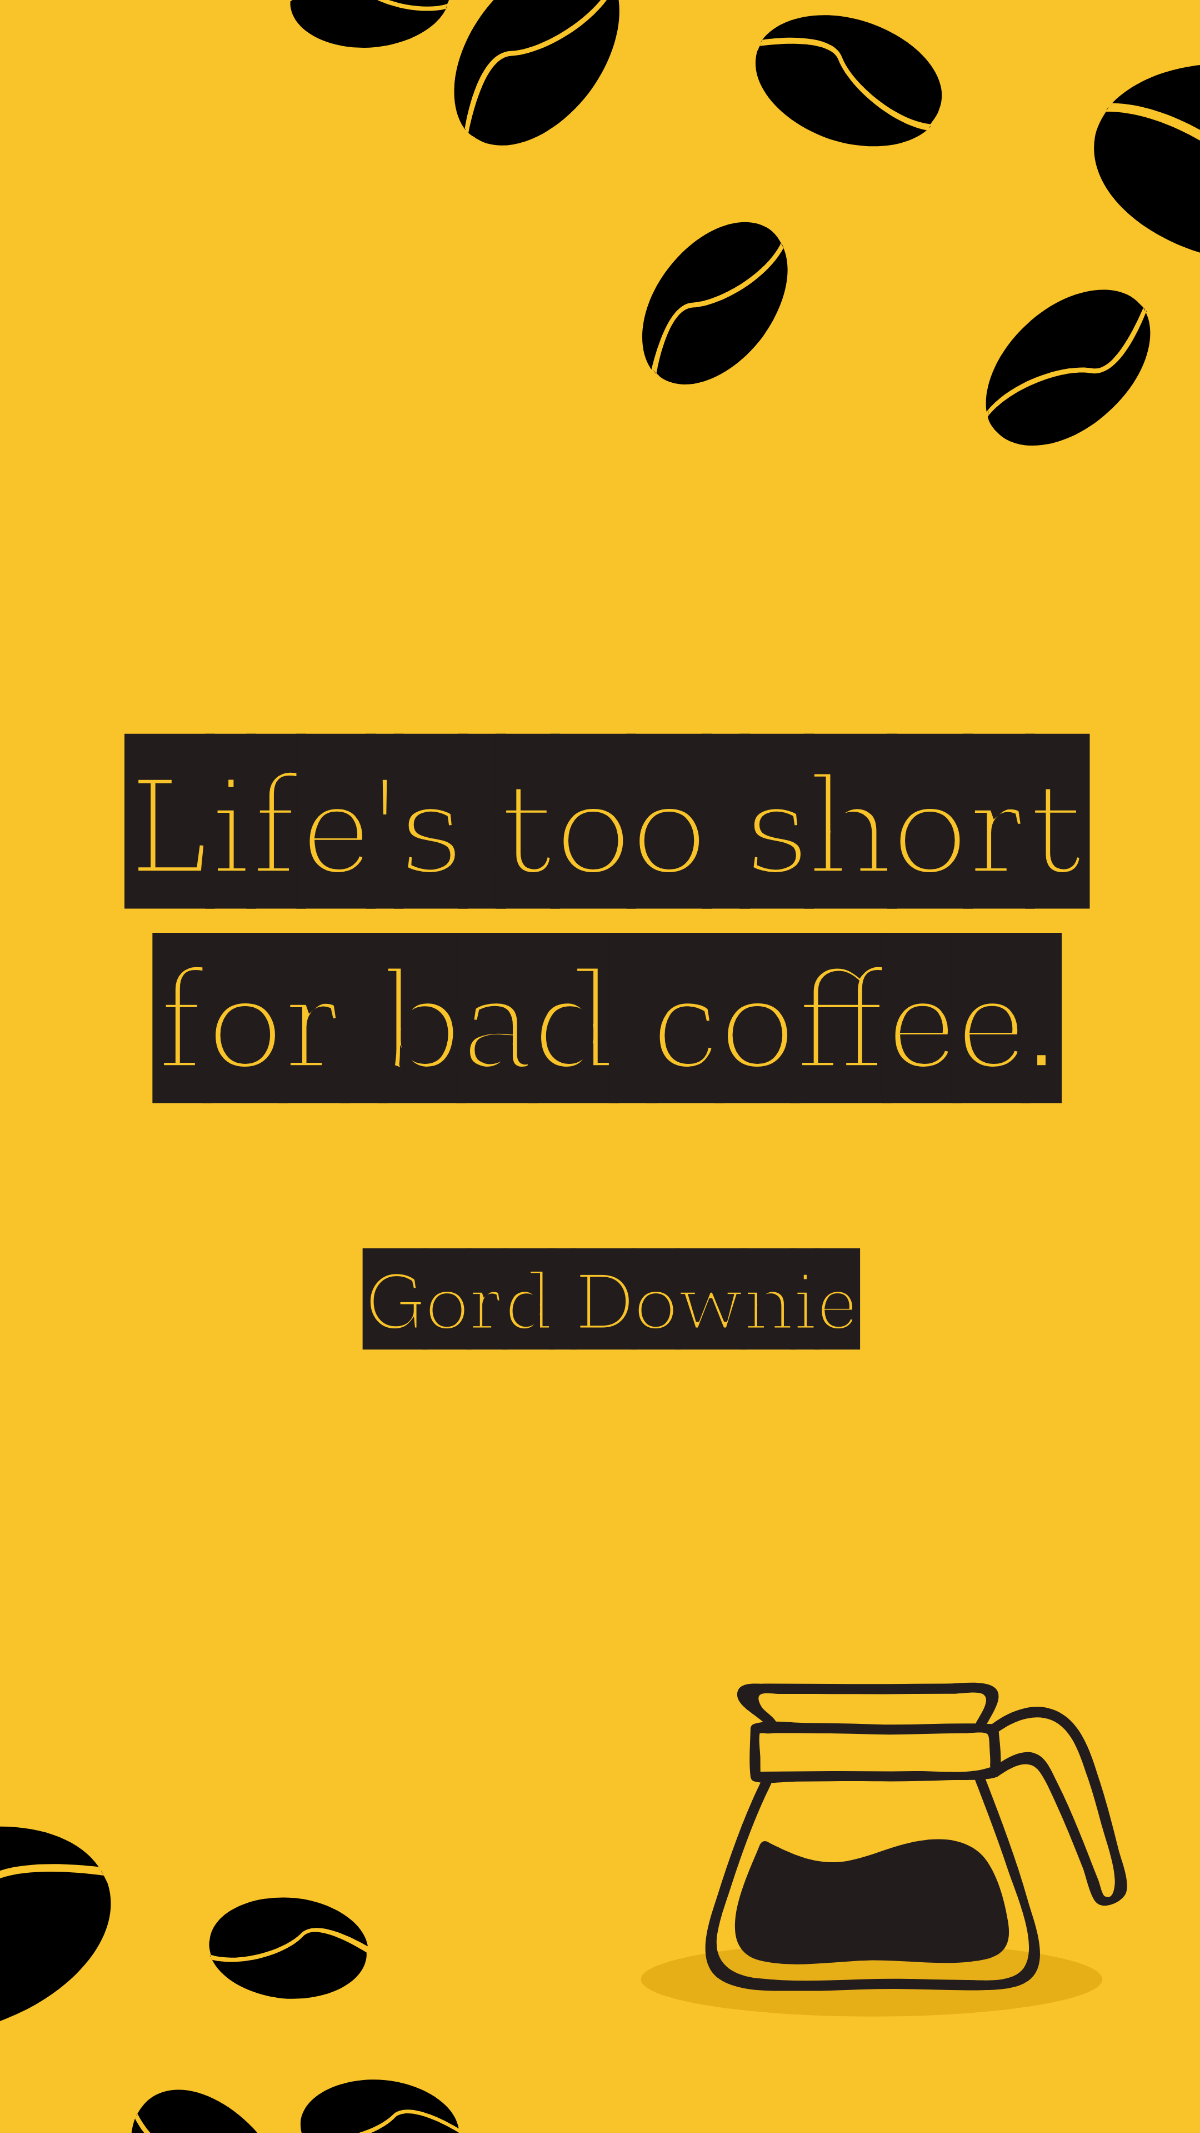 Gord Downie - Life's too short for bad coffee.